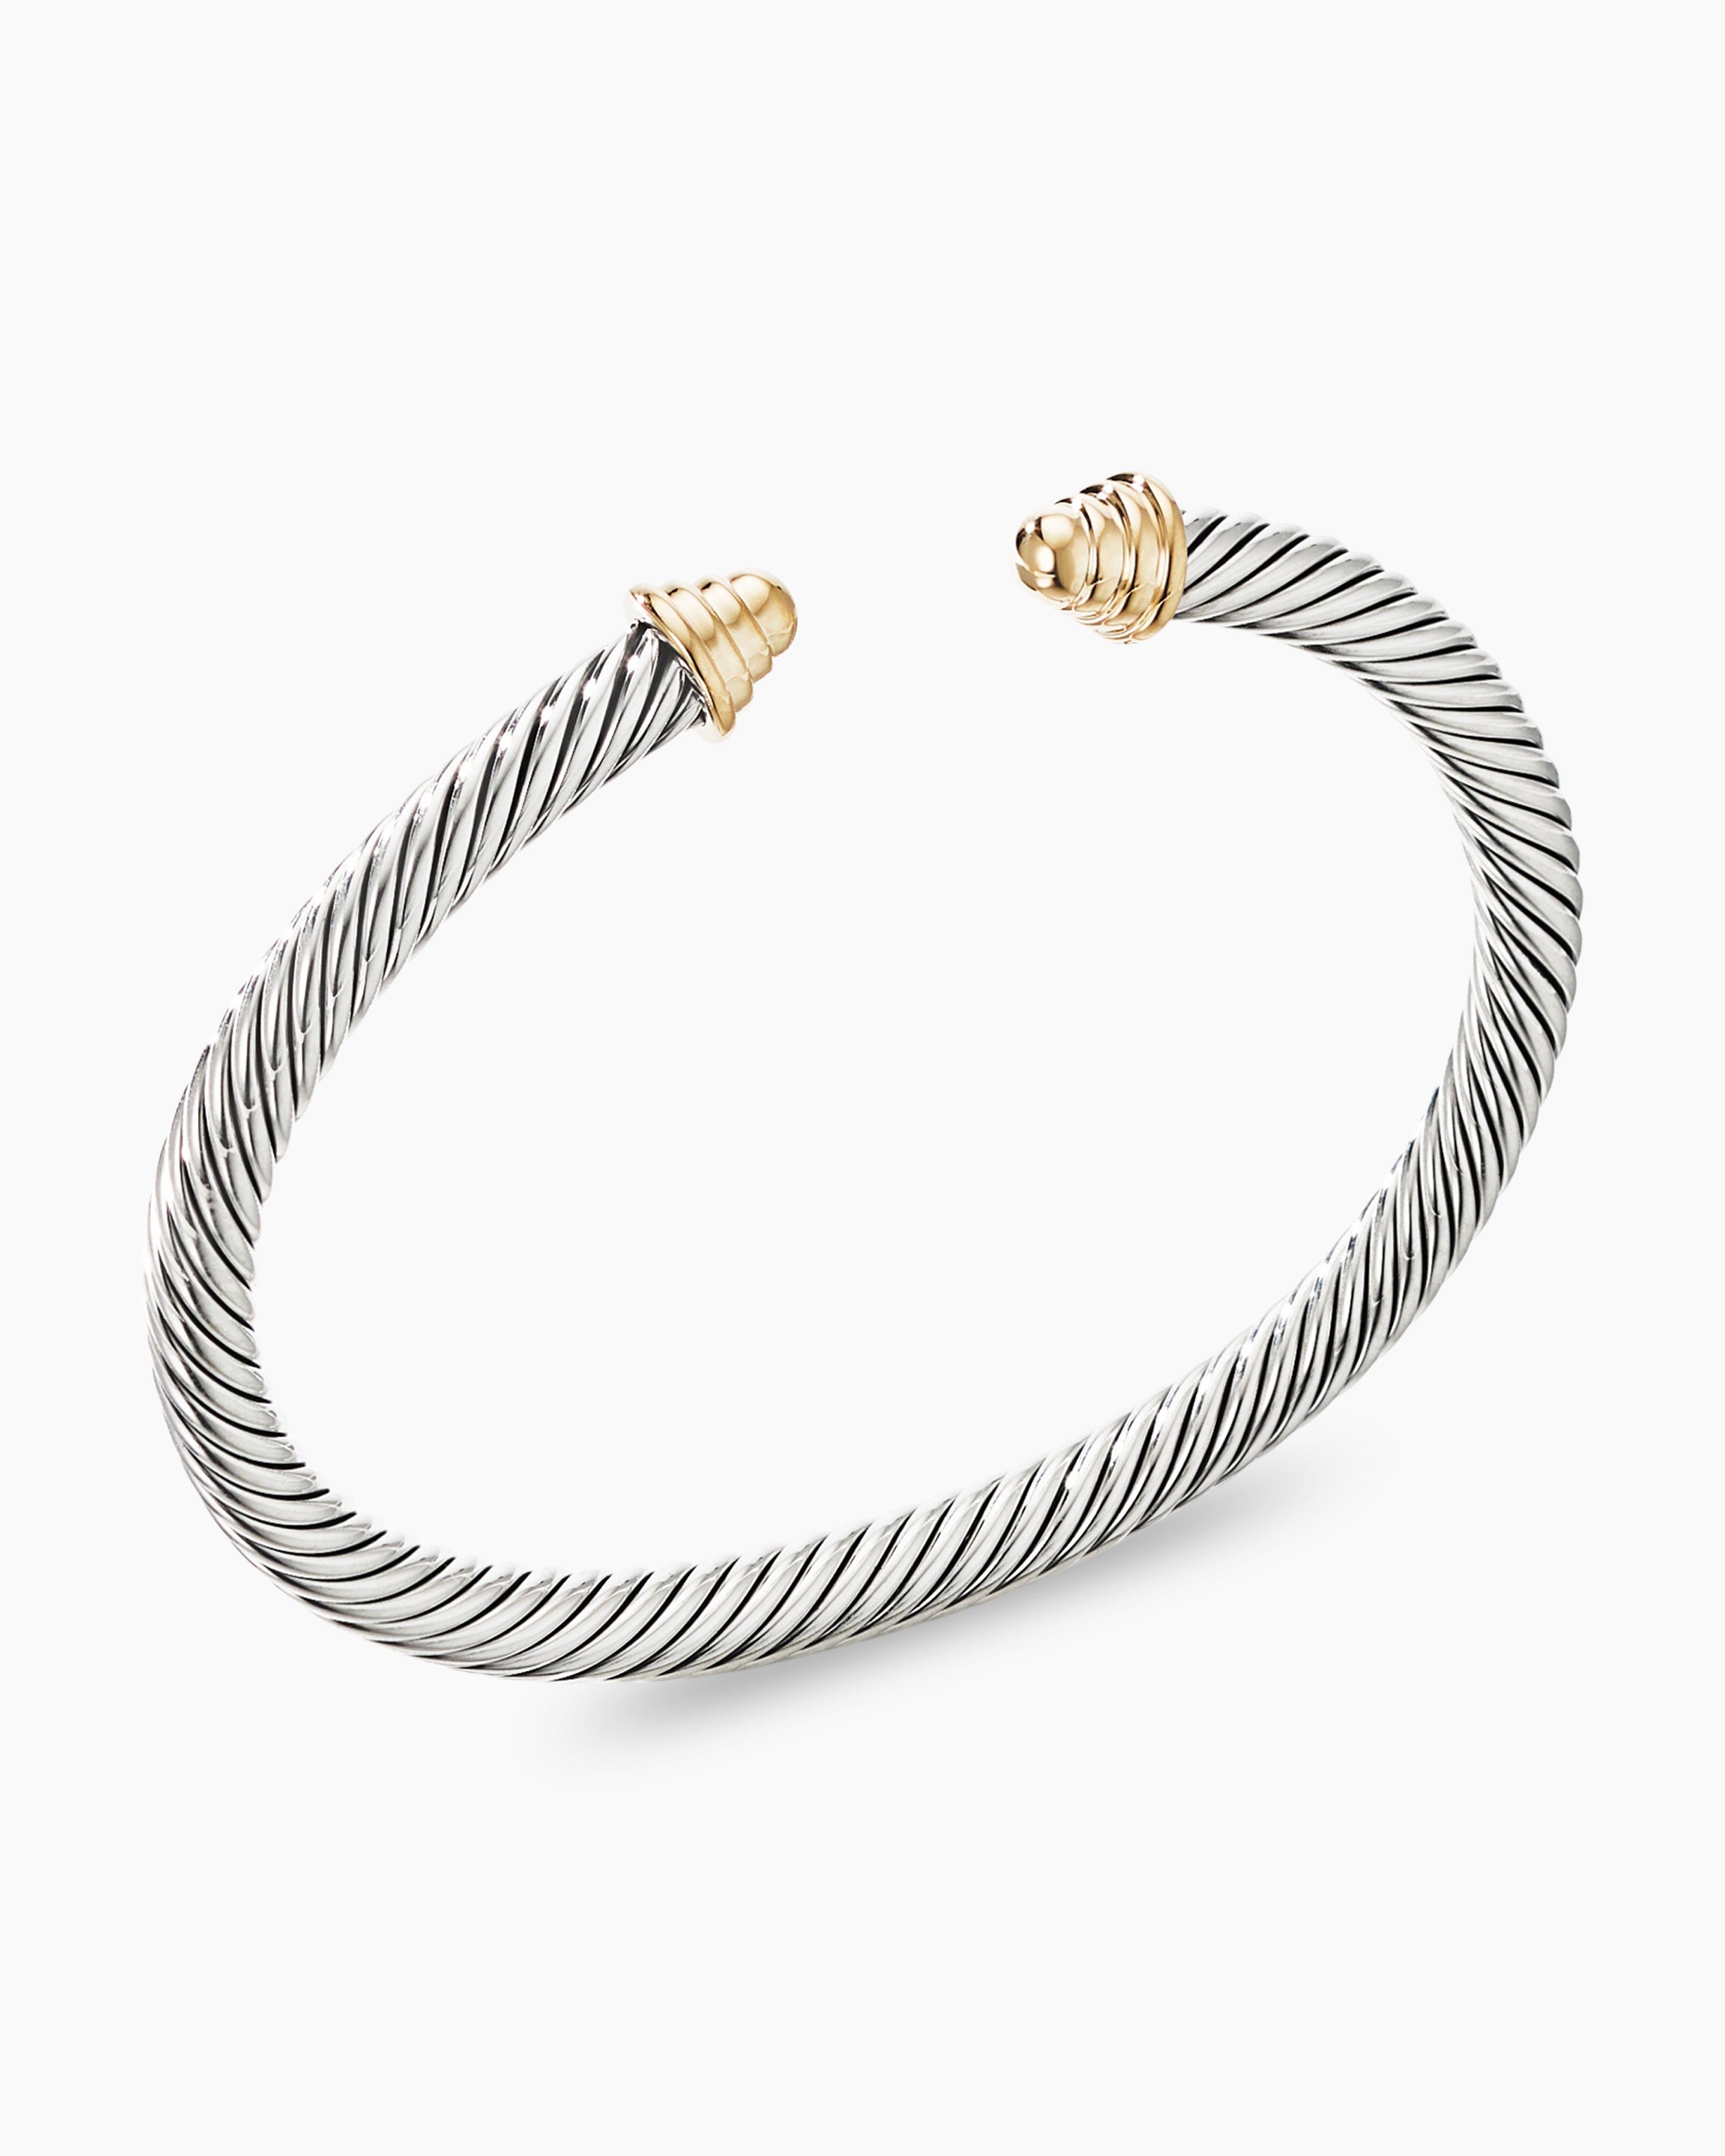 David Yurman Albion Kid's Necklace with Blue Topaz and Diamonds | Lee  Michaels Fine Jewelry stores